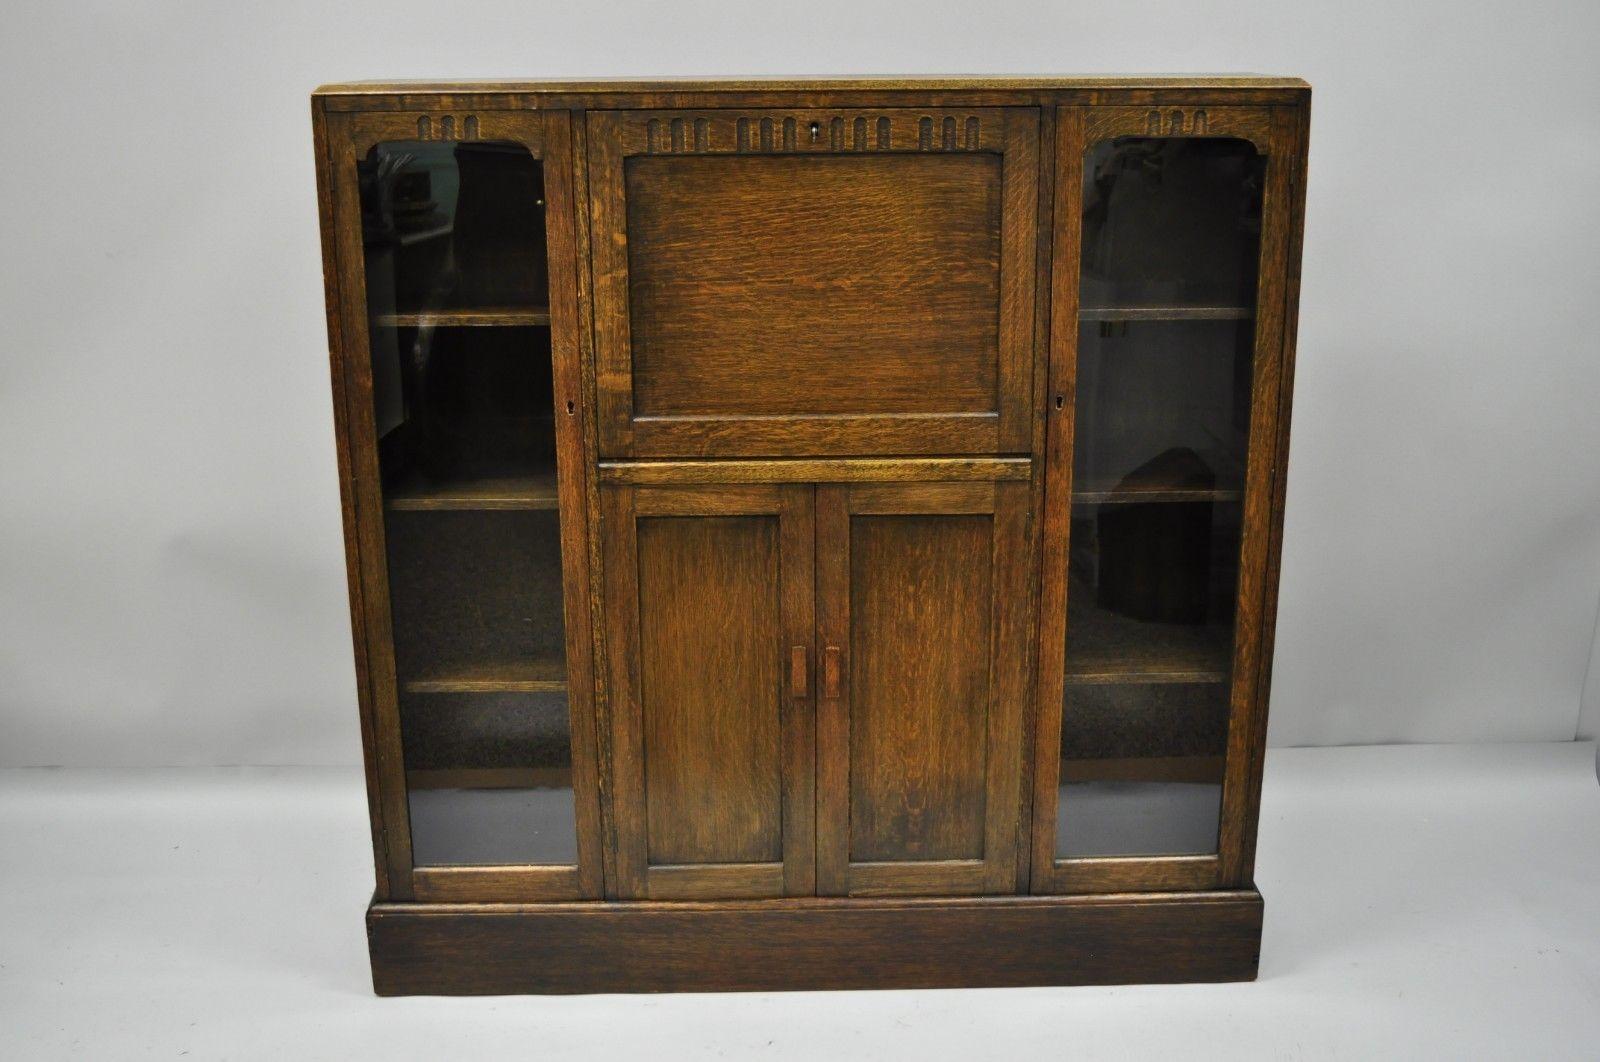 Antique oak Arts & Crafts drop front secretary desk bookcase by Goodalls. Item features solid wood construction, beautiful wood grain, original label, working lock & key for desk, side doors unlocked and does not include key. circa early 20th